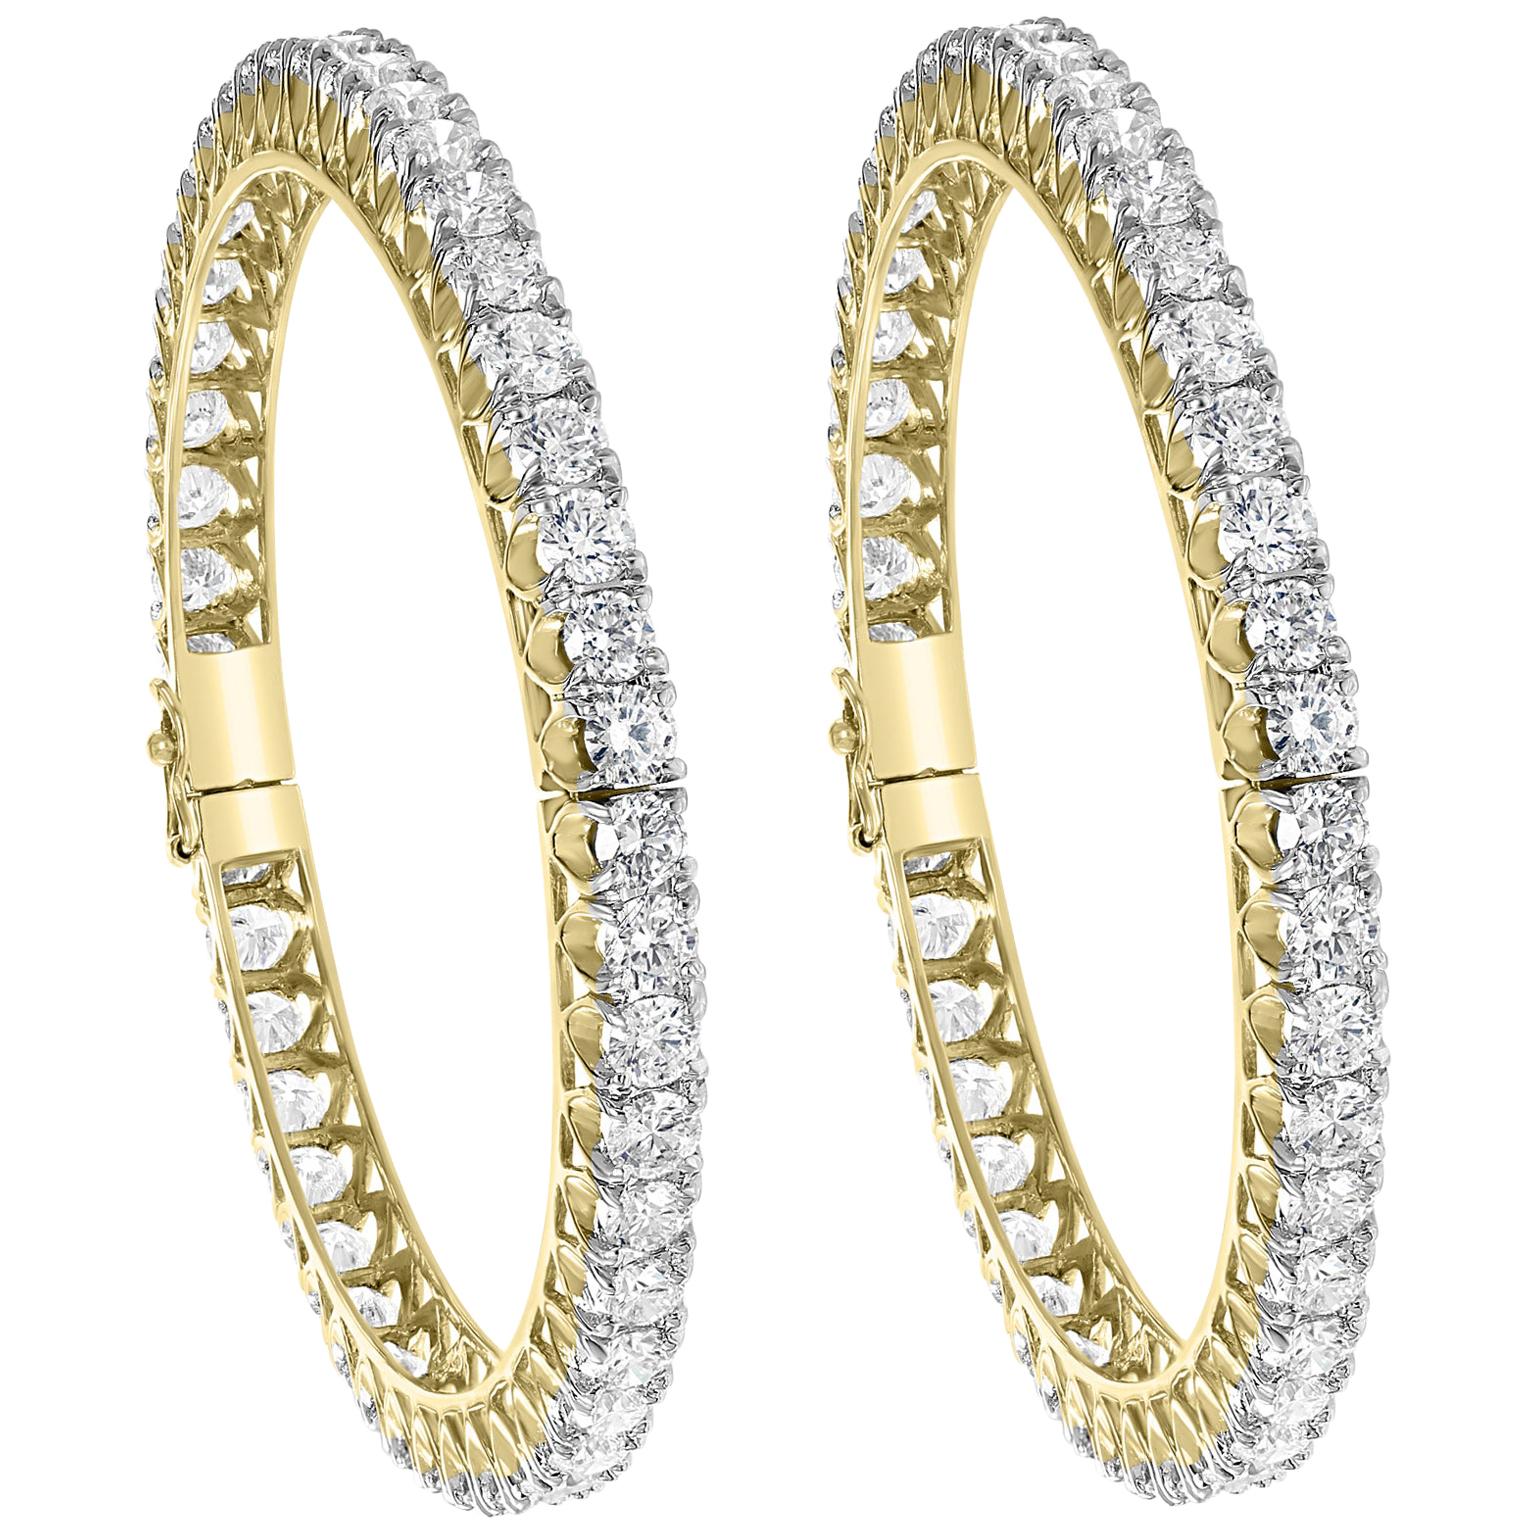 30 Pointer Each, 29 Ct Single Line Eternity 18 Kt Gold and Diamond Bangle, Pair For Sale